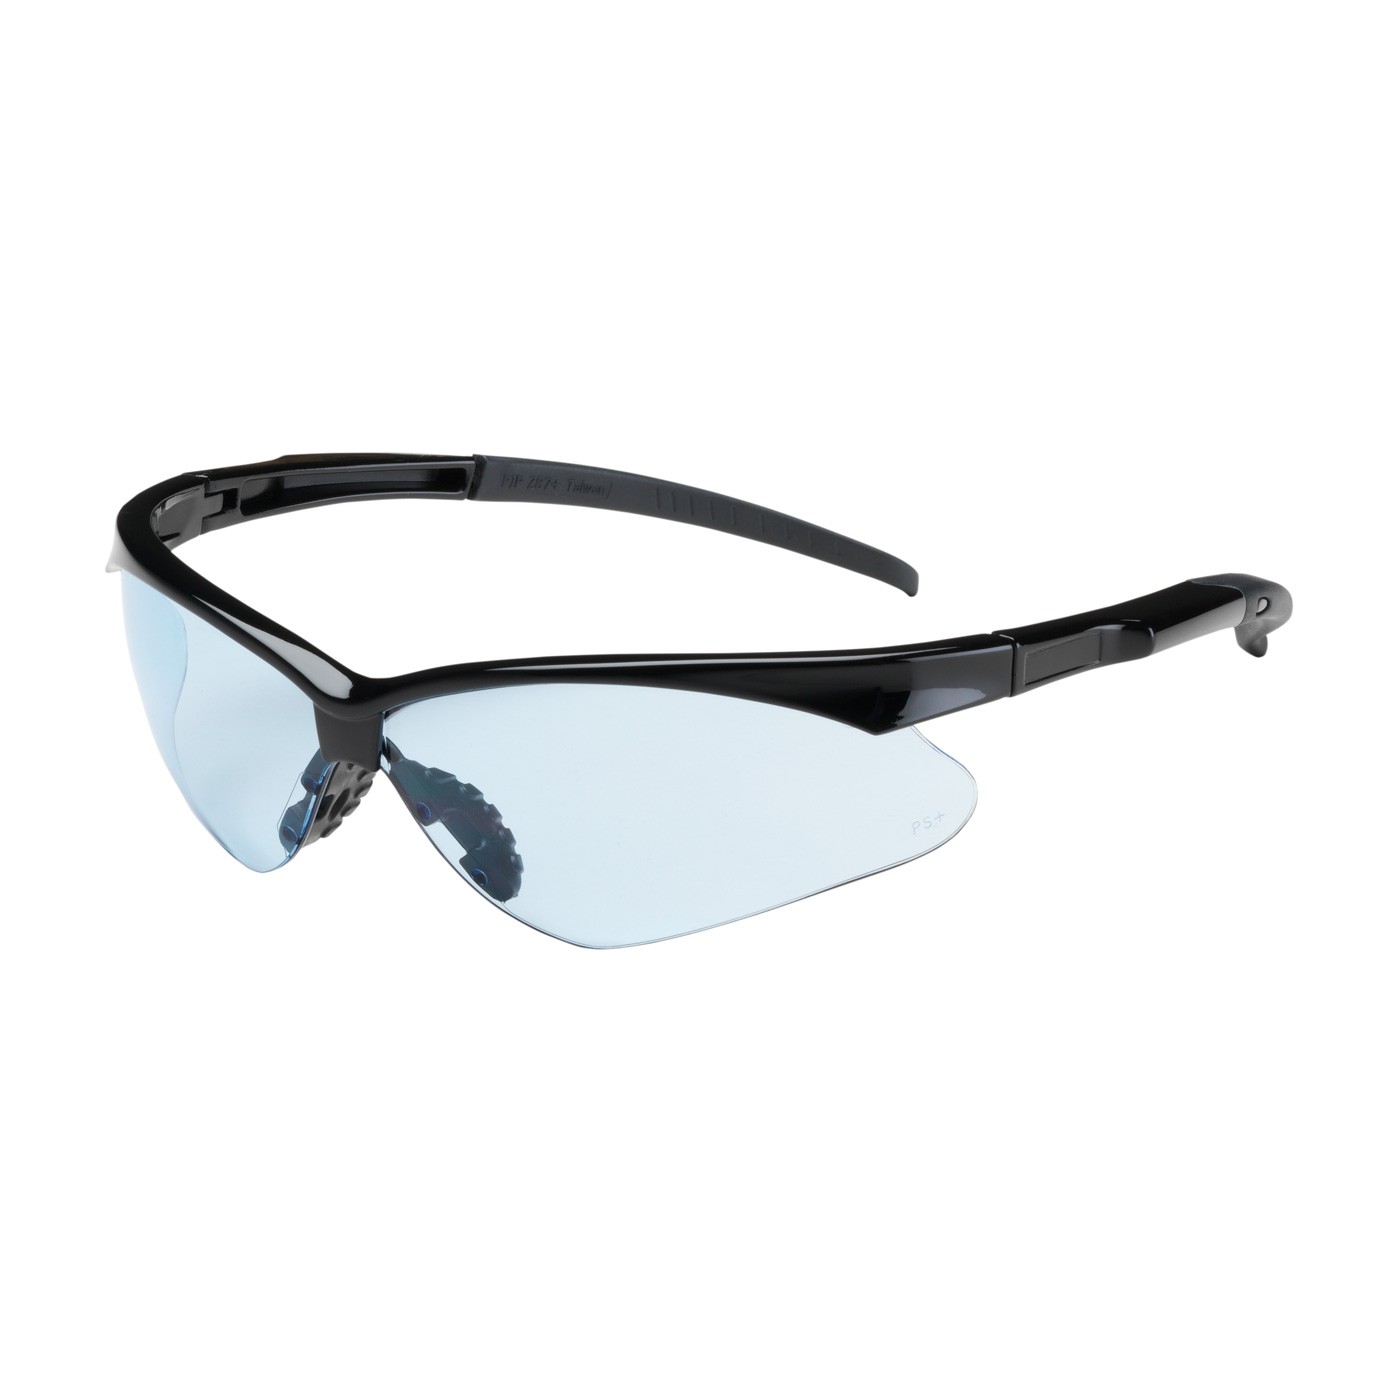 Adversary™ Semi-Rimless Safety Glasses with Black Frame, Light Blue Lens and Anti-Scratch Coating  (#250-28-0003)